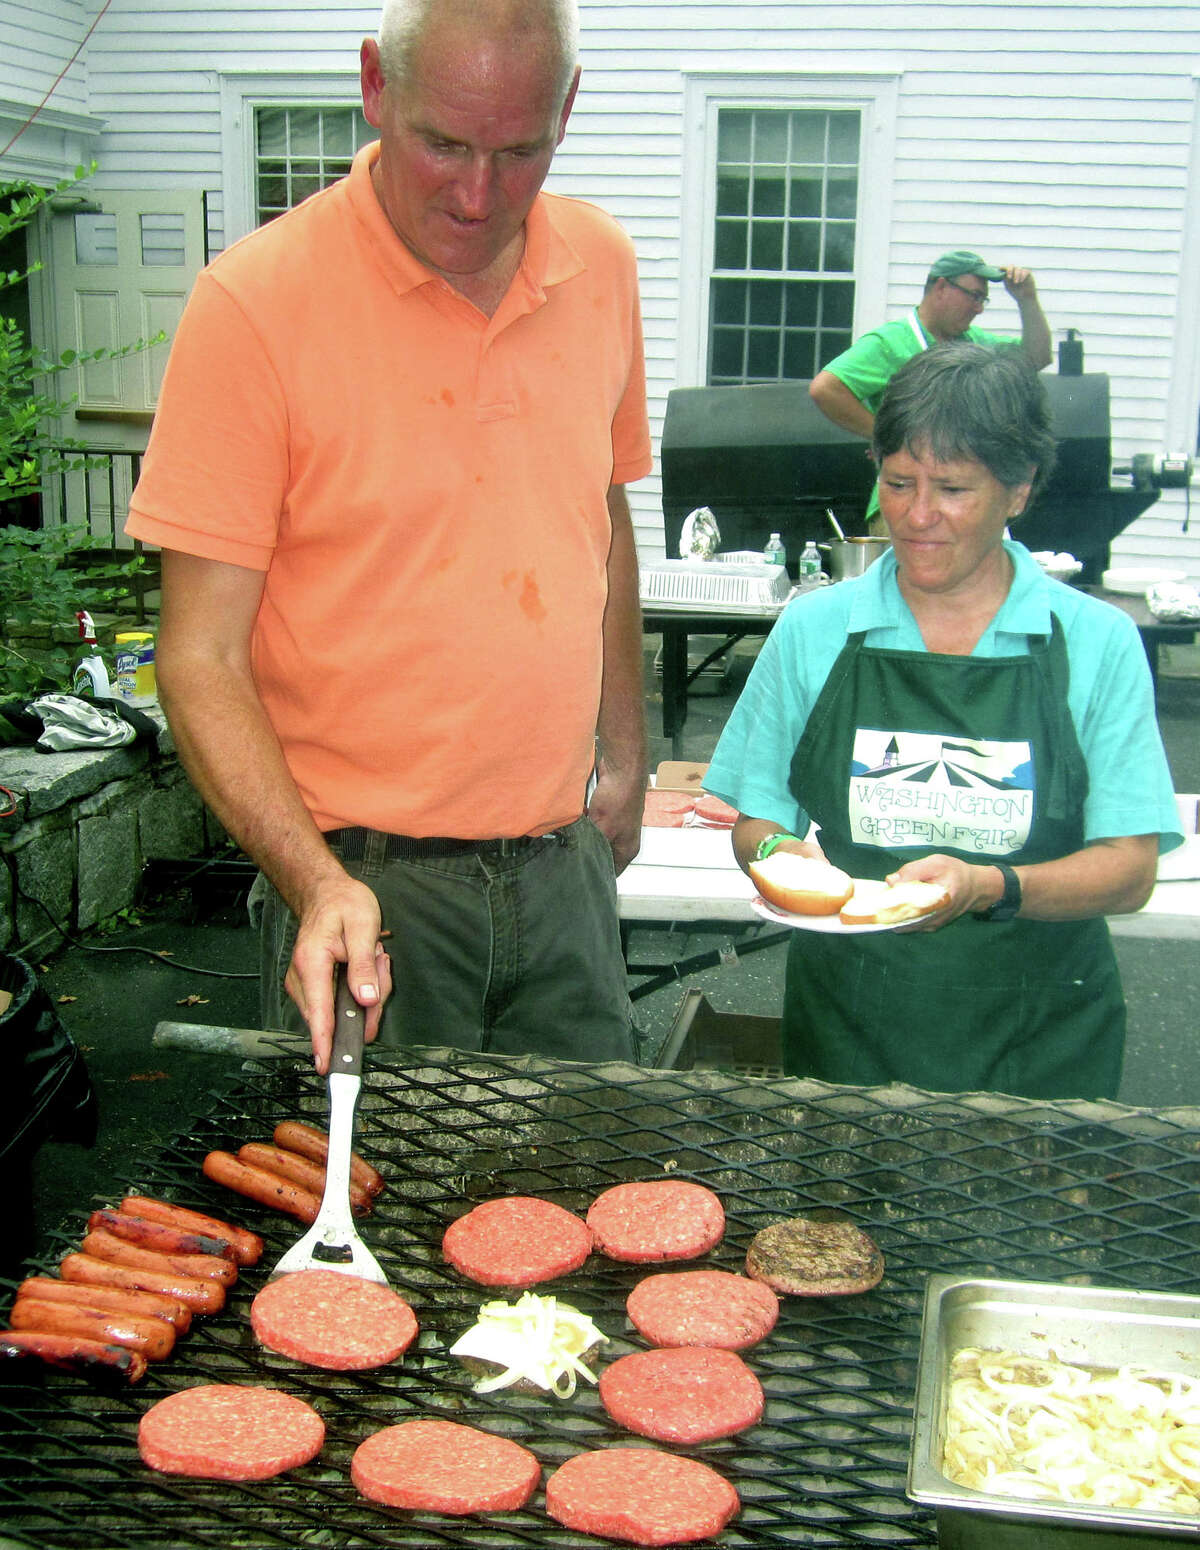 Fifty and going strong The First Congregational Church of Washington's Green Fair turned age 50 Saturday, July 13. Many hundreds of area residents descended on the Washington Green to enjoy a wide variety of attractions including silent and live auctions, a book sale, children's activities and much more. Above, grill man Scott Redstone preps tasty burgers and dogs as volunteers such as Washington town clerk Sheila Anson serve the food up to hungry patrons. For the story and more photos, see the July 26 edition of the Spectrum and visit www.newmilfordspectrum.com.